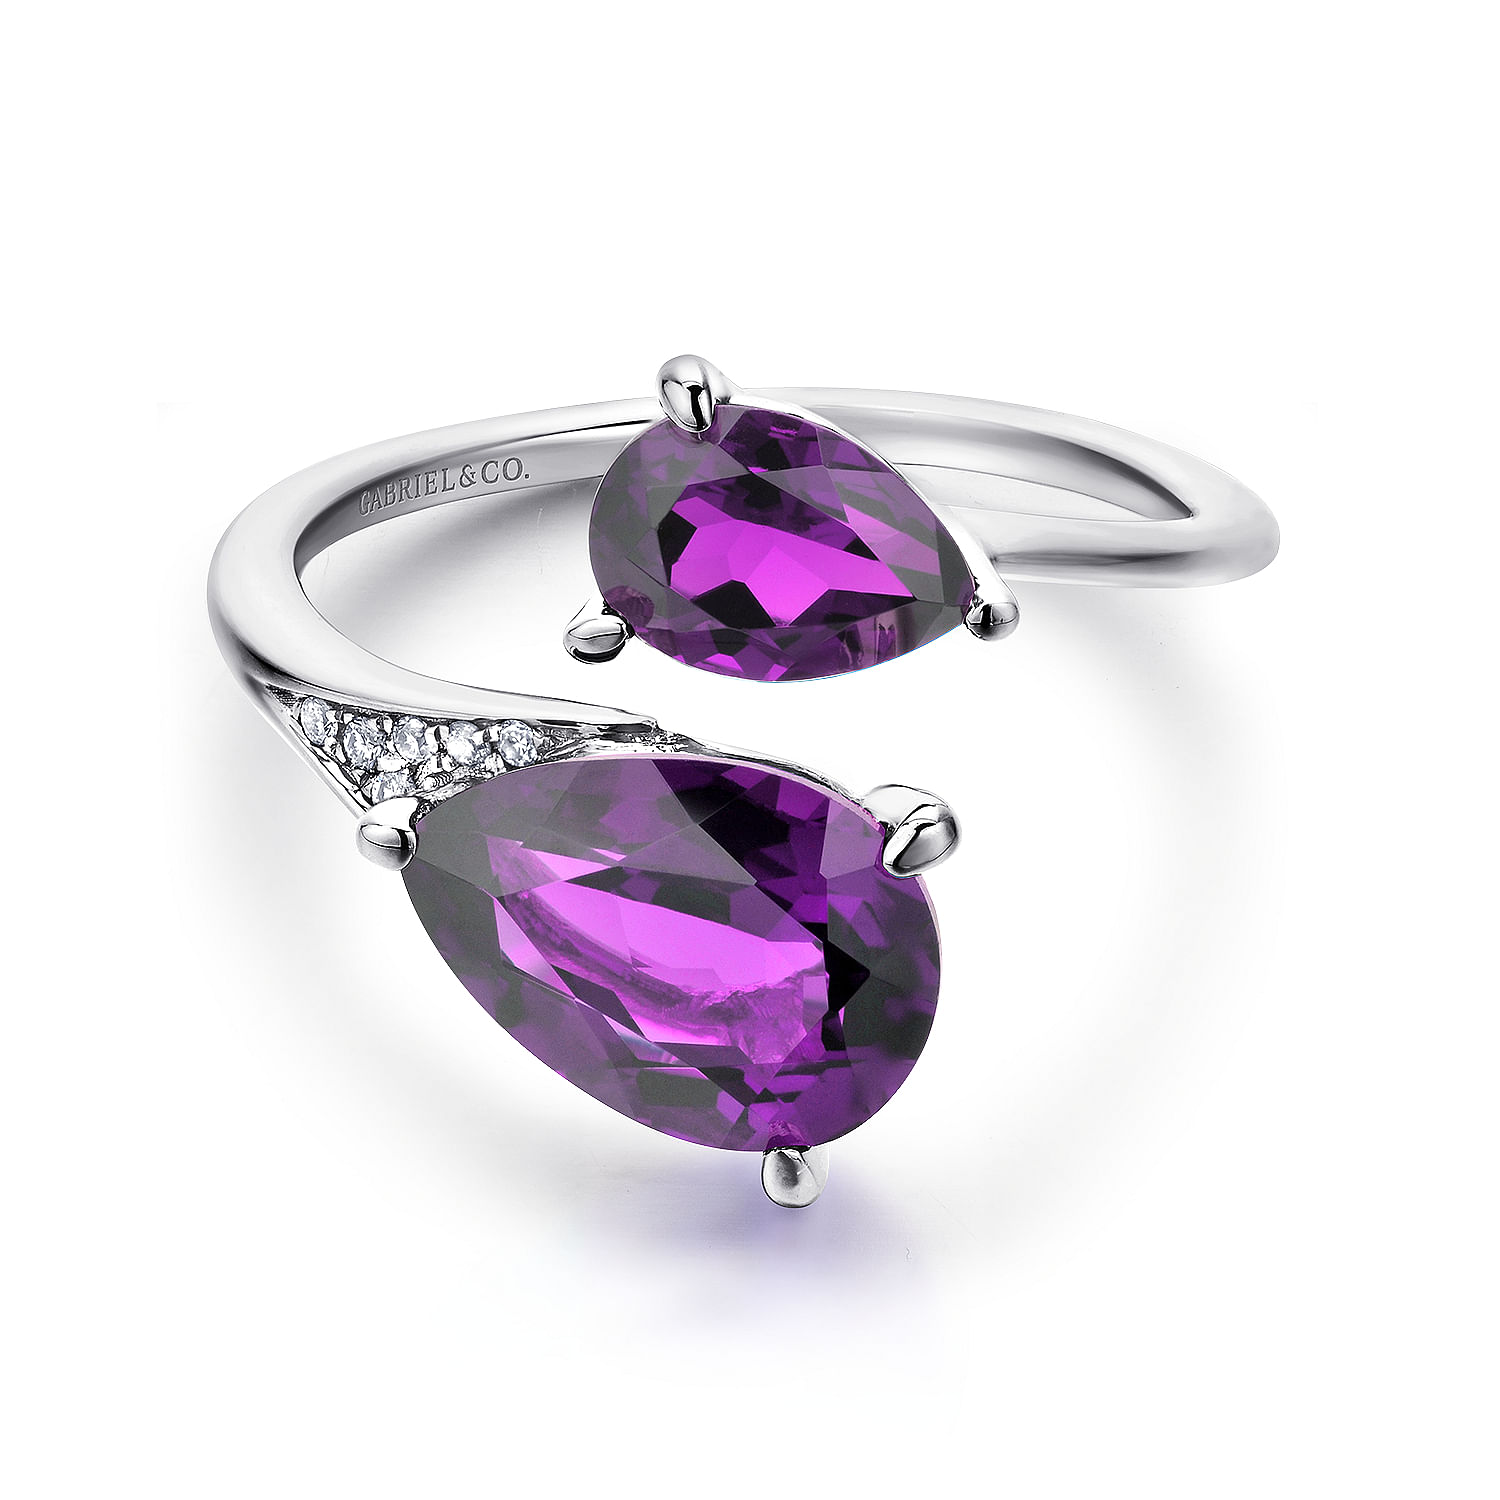 14K White Gold Pear Shape Amethyst Split Ring with Diamond Accents